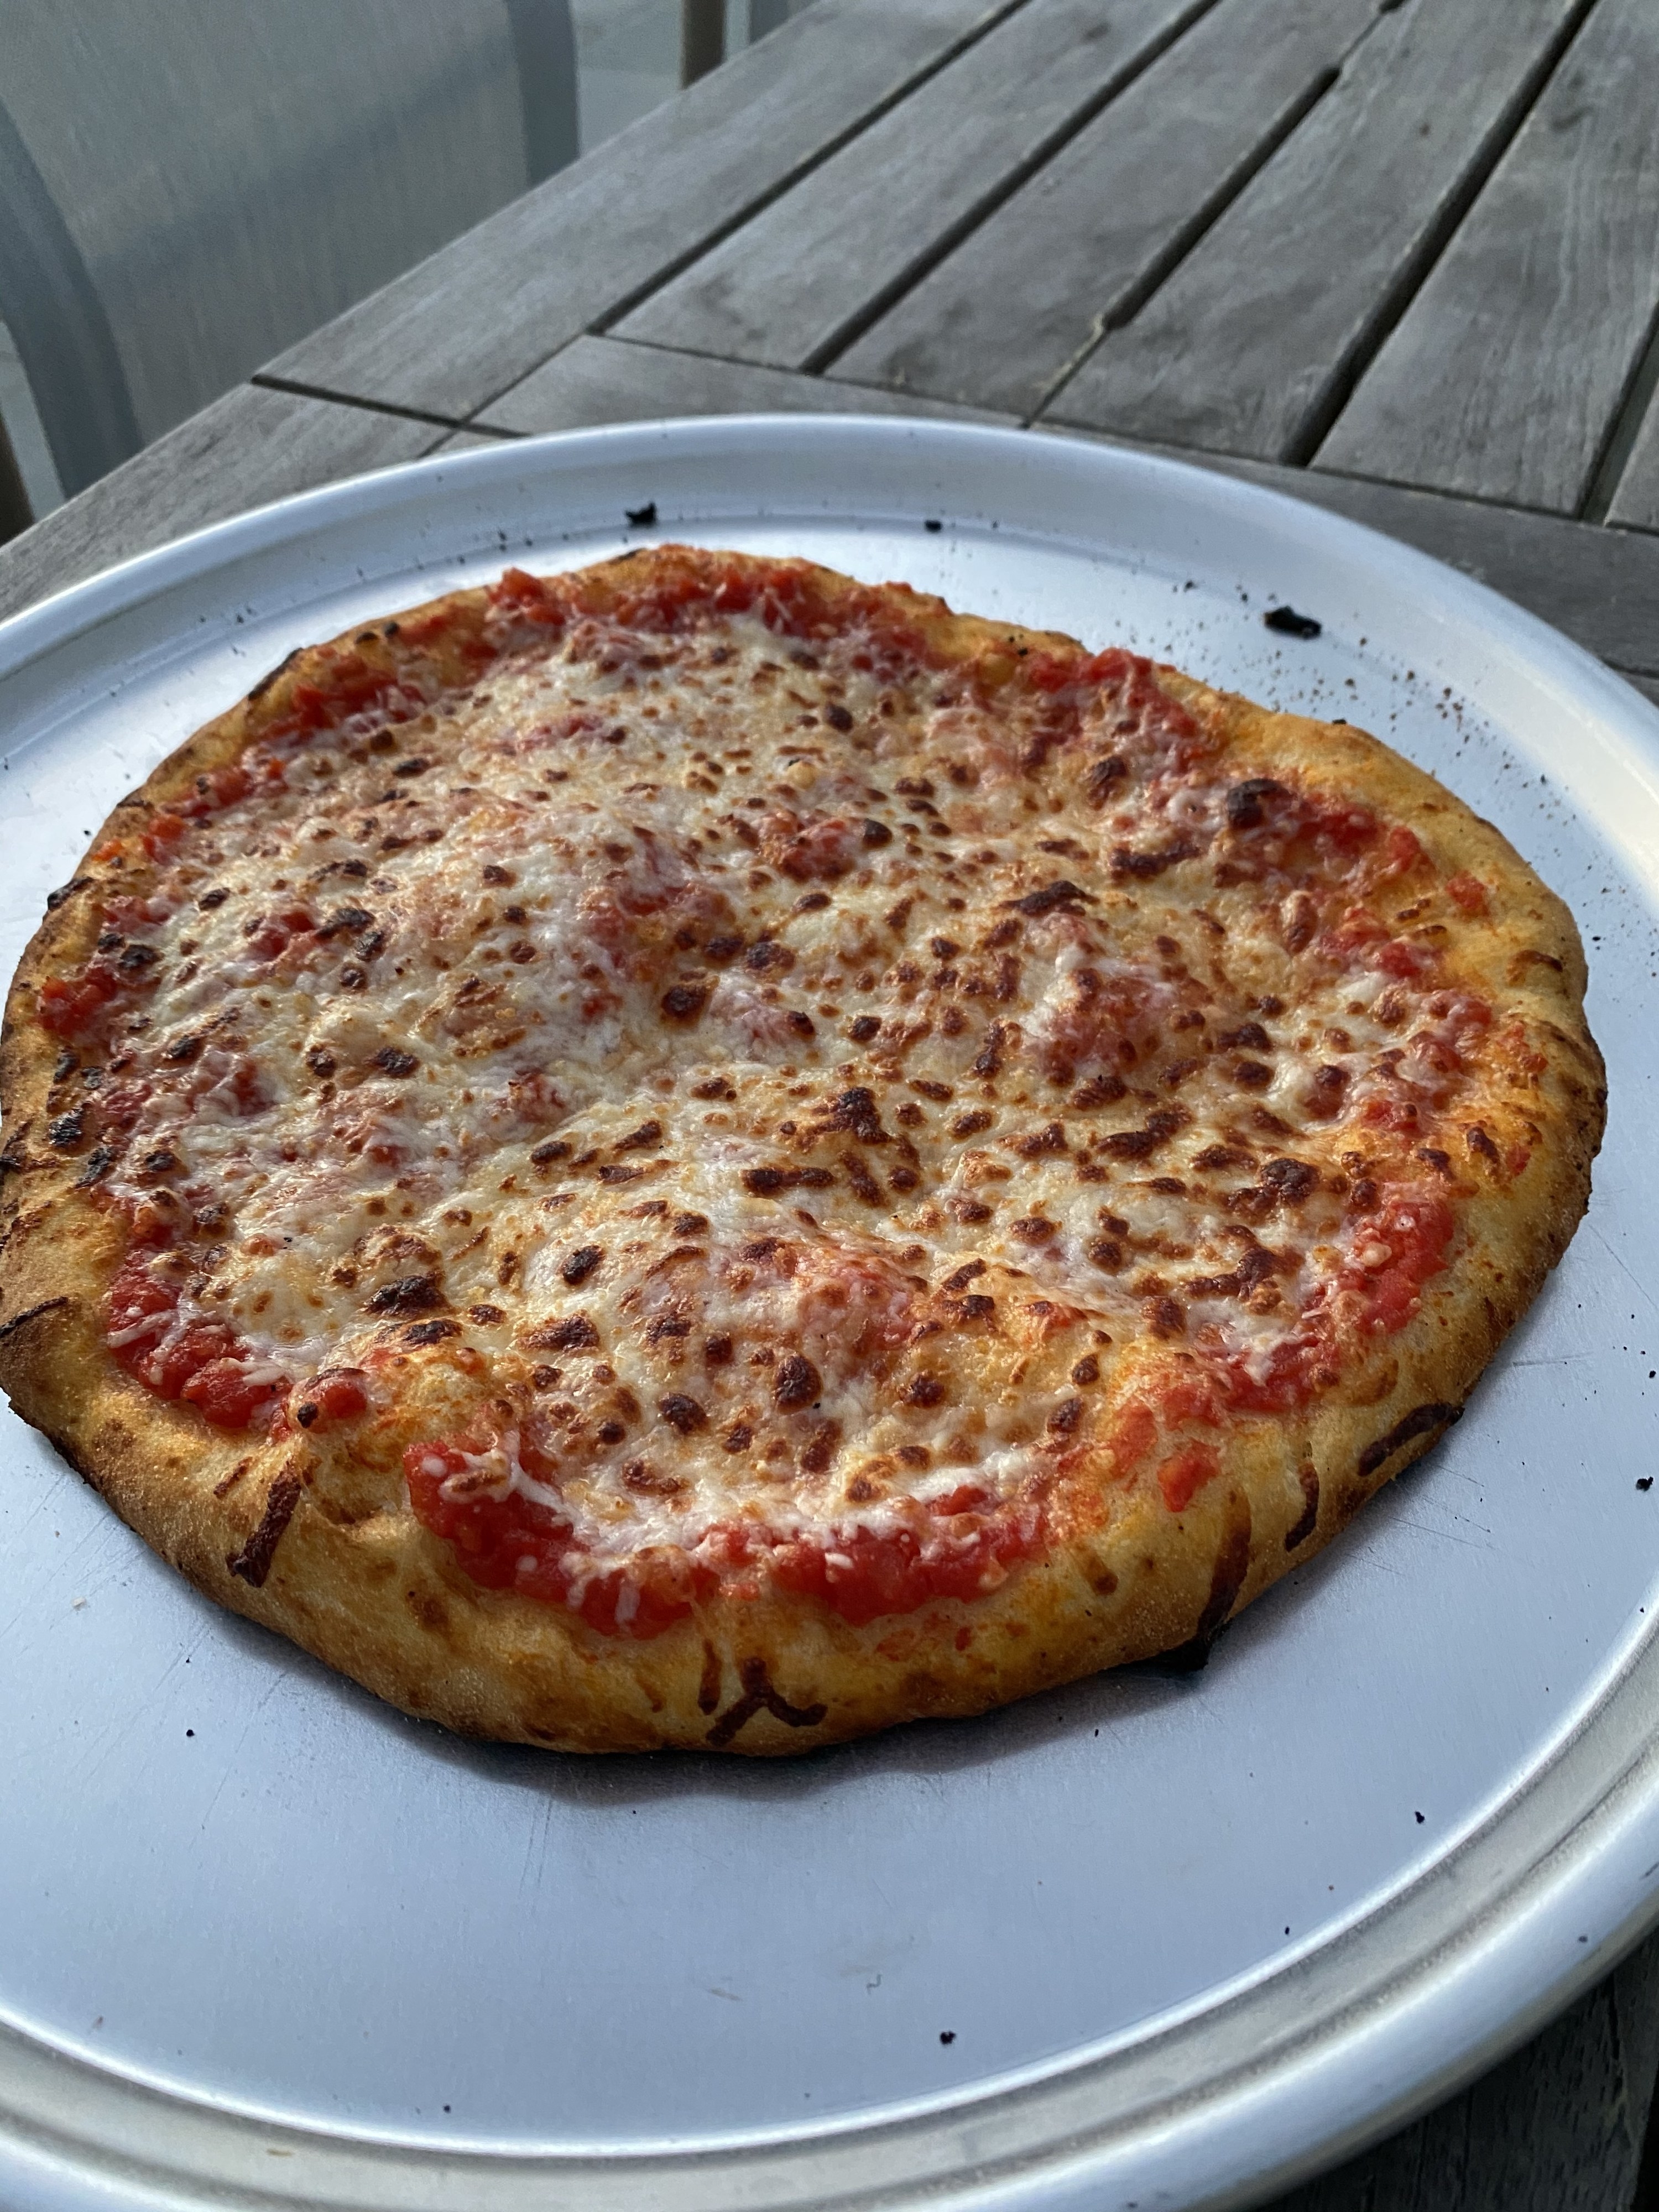 A freshly cooked pizza, just out from the pizza oven with charred crust and golden brown cheese.